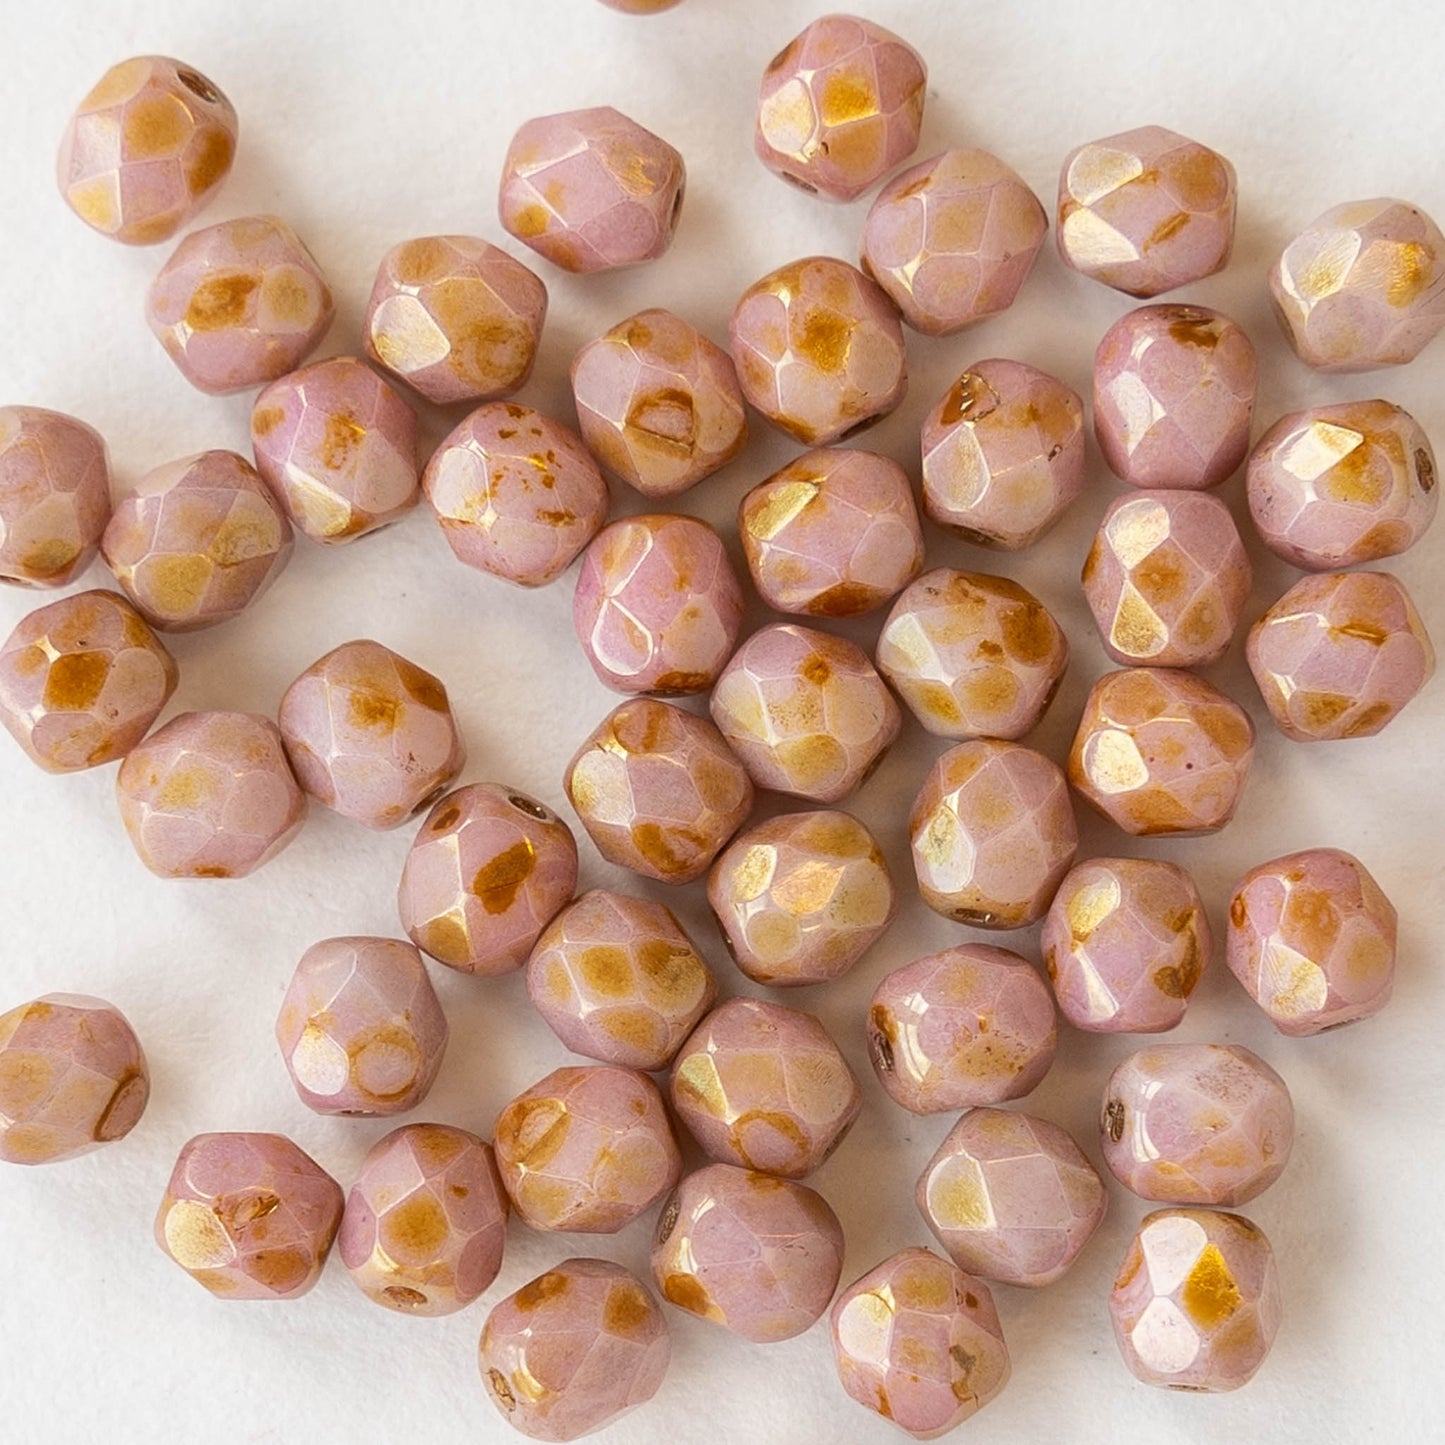 4mm Round Firepolished Beads - Mauve Pink Picassso - 50 Beads